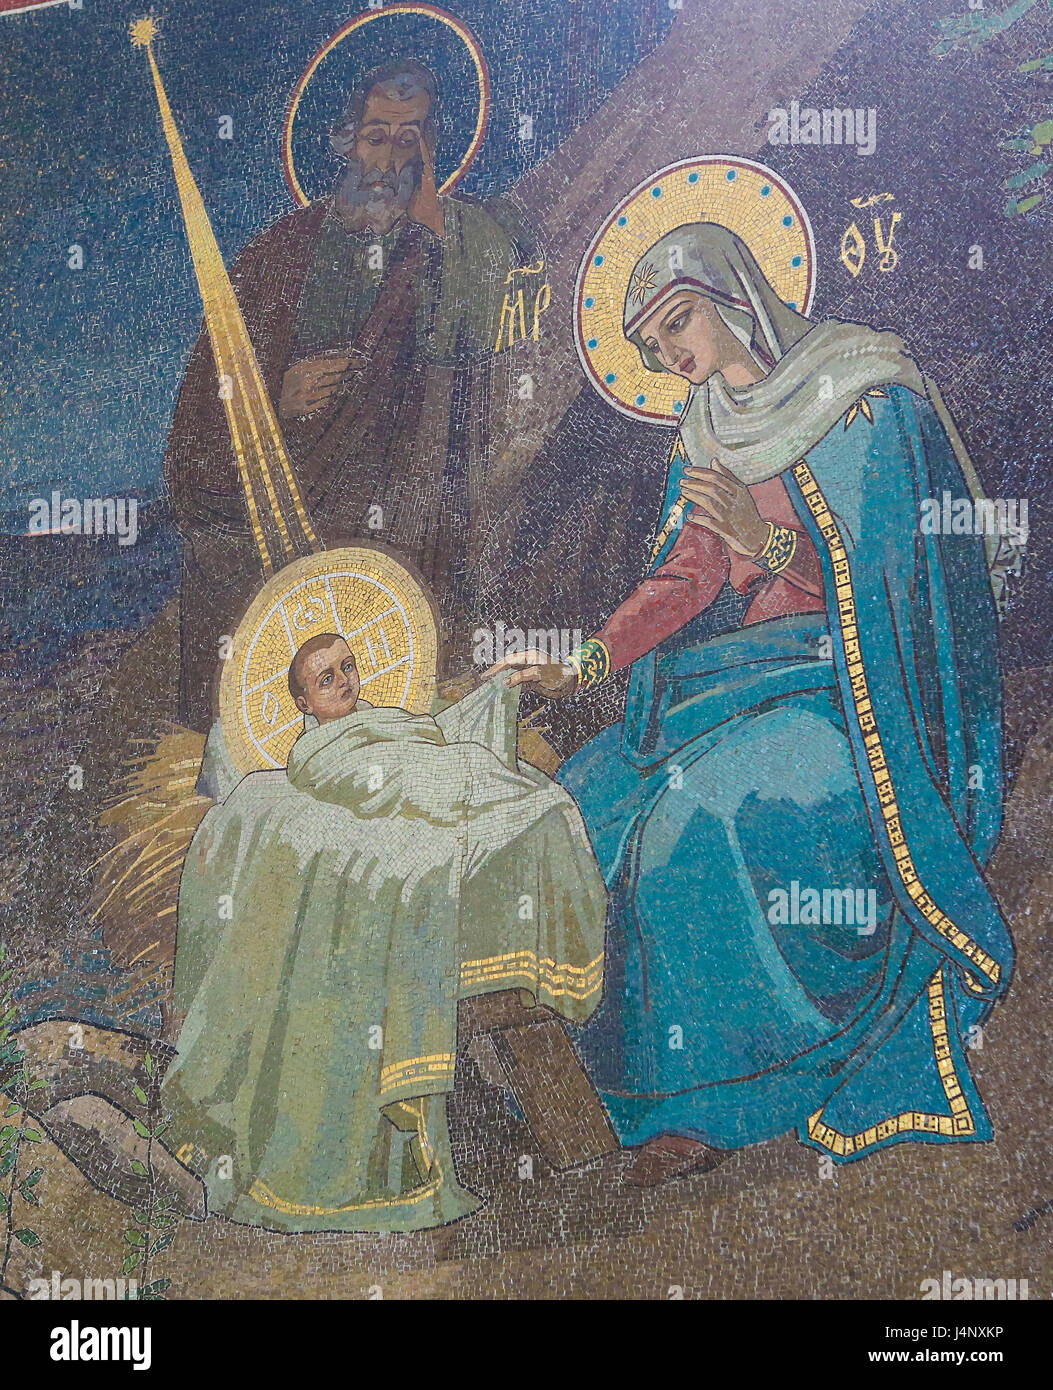 Mosaic in the Church of the Savior on Spilled Blood in St. Petersburg, Russia, depicting a Nativity Scene at Christmas Stock Photo